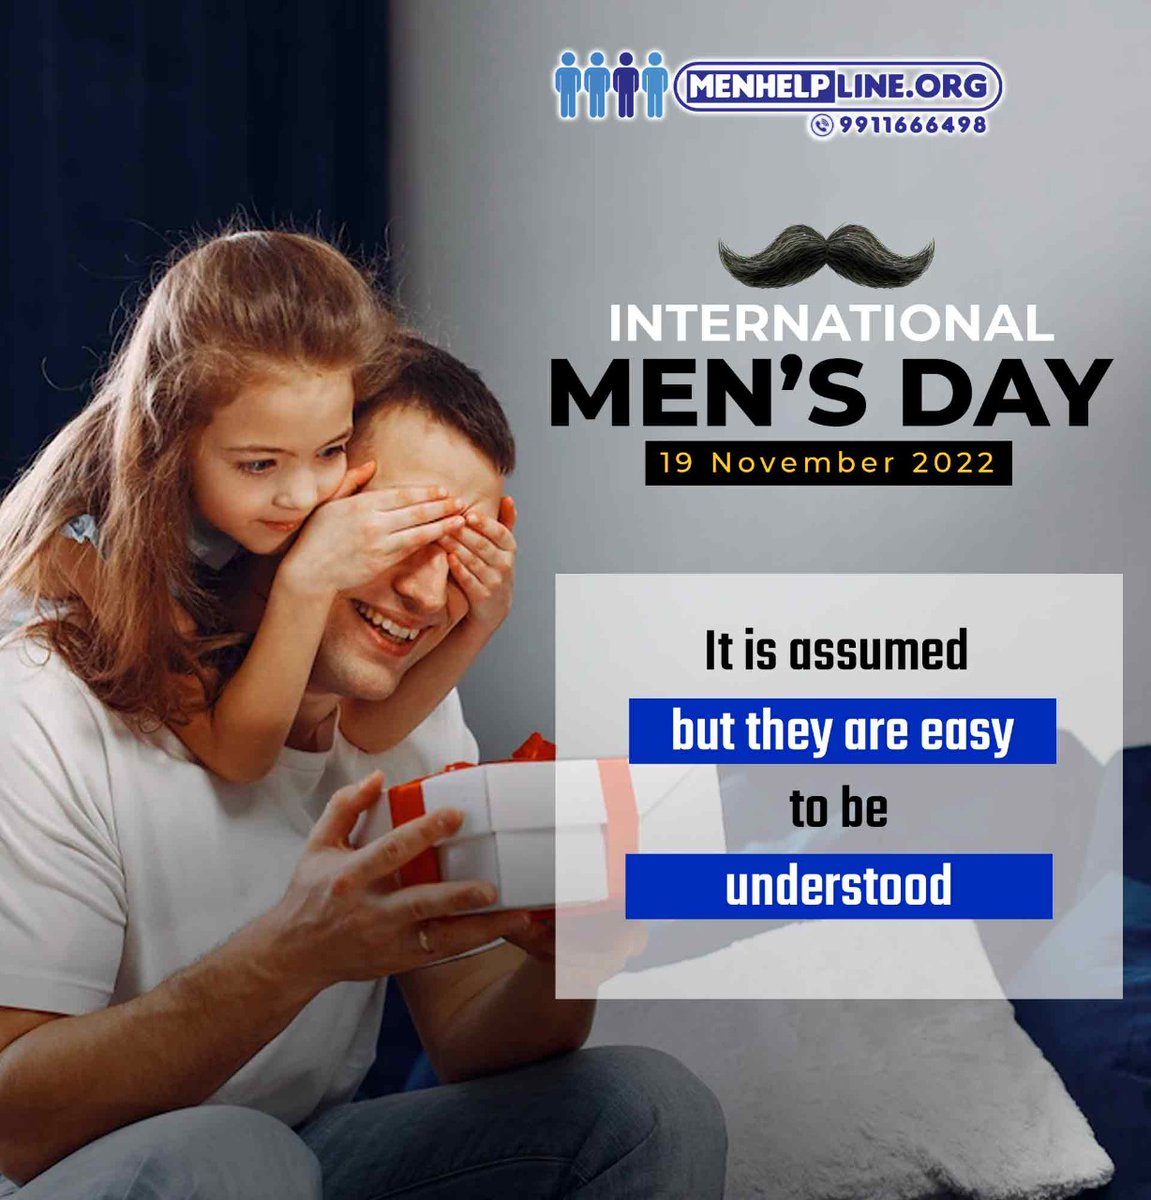 Men are easy to be understood, they are not complex as presented.

Men's love & sacrifice for their family must not be ignored.

#InternationalMensDay #mensday2022 #IMD2022 #InternationalMensDay2022 #happyfathersday2022 #HumanRights #mensrights #mentoo